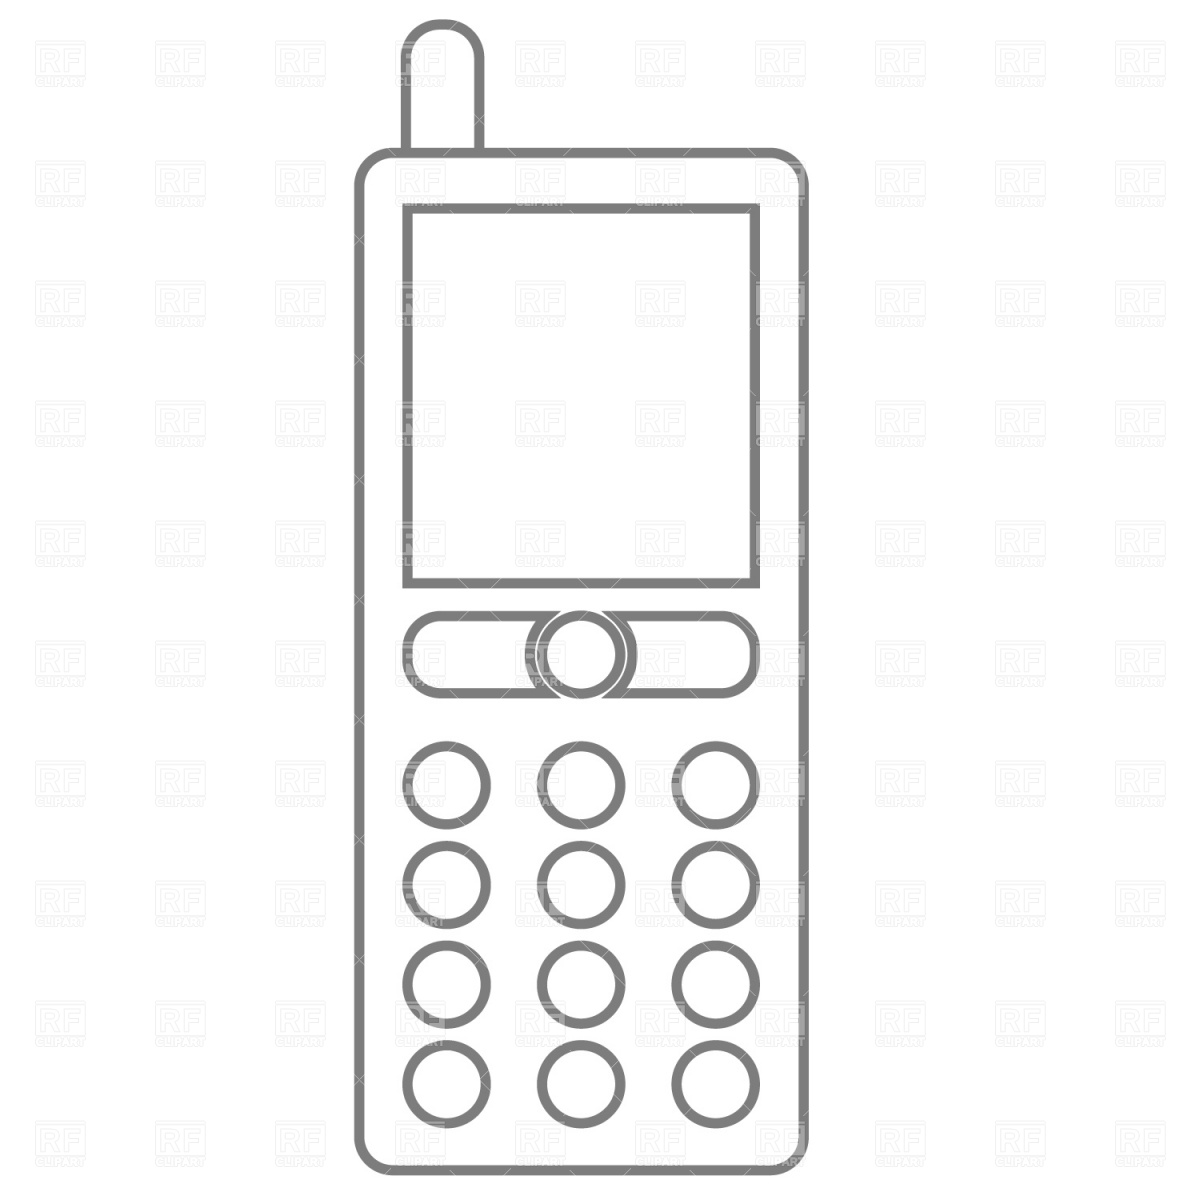 mobile phone clipart download - photo #42